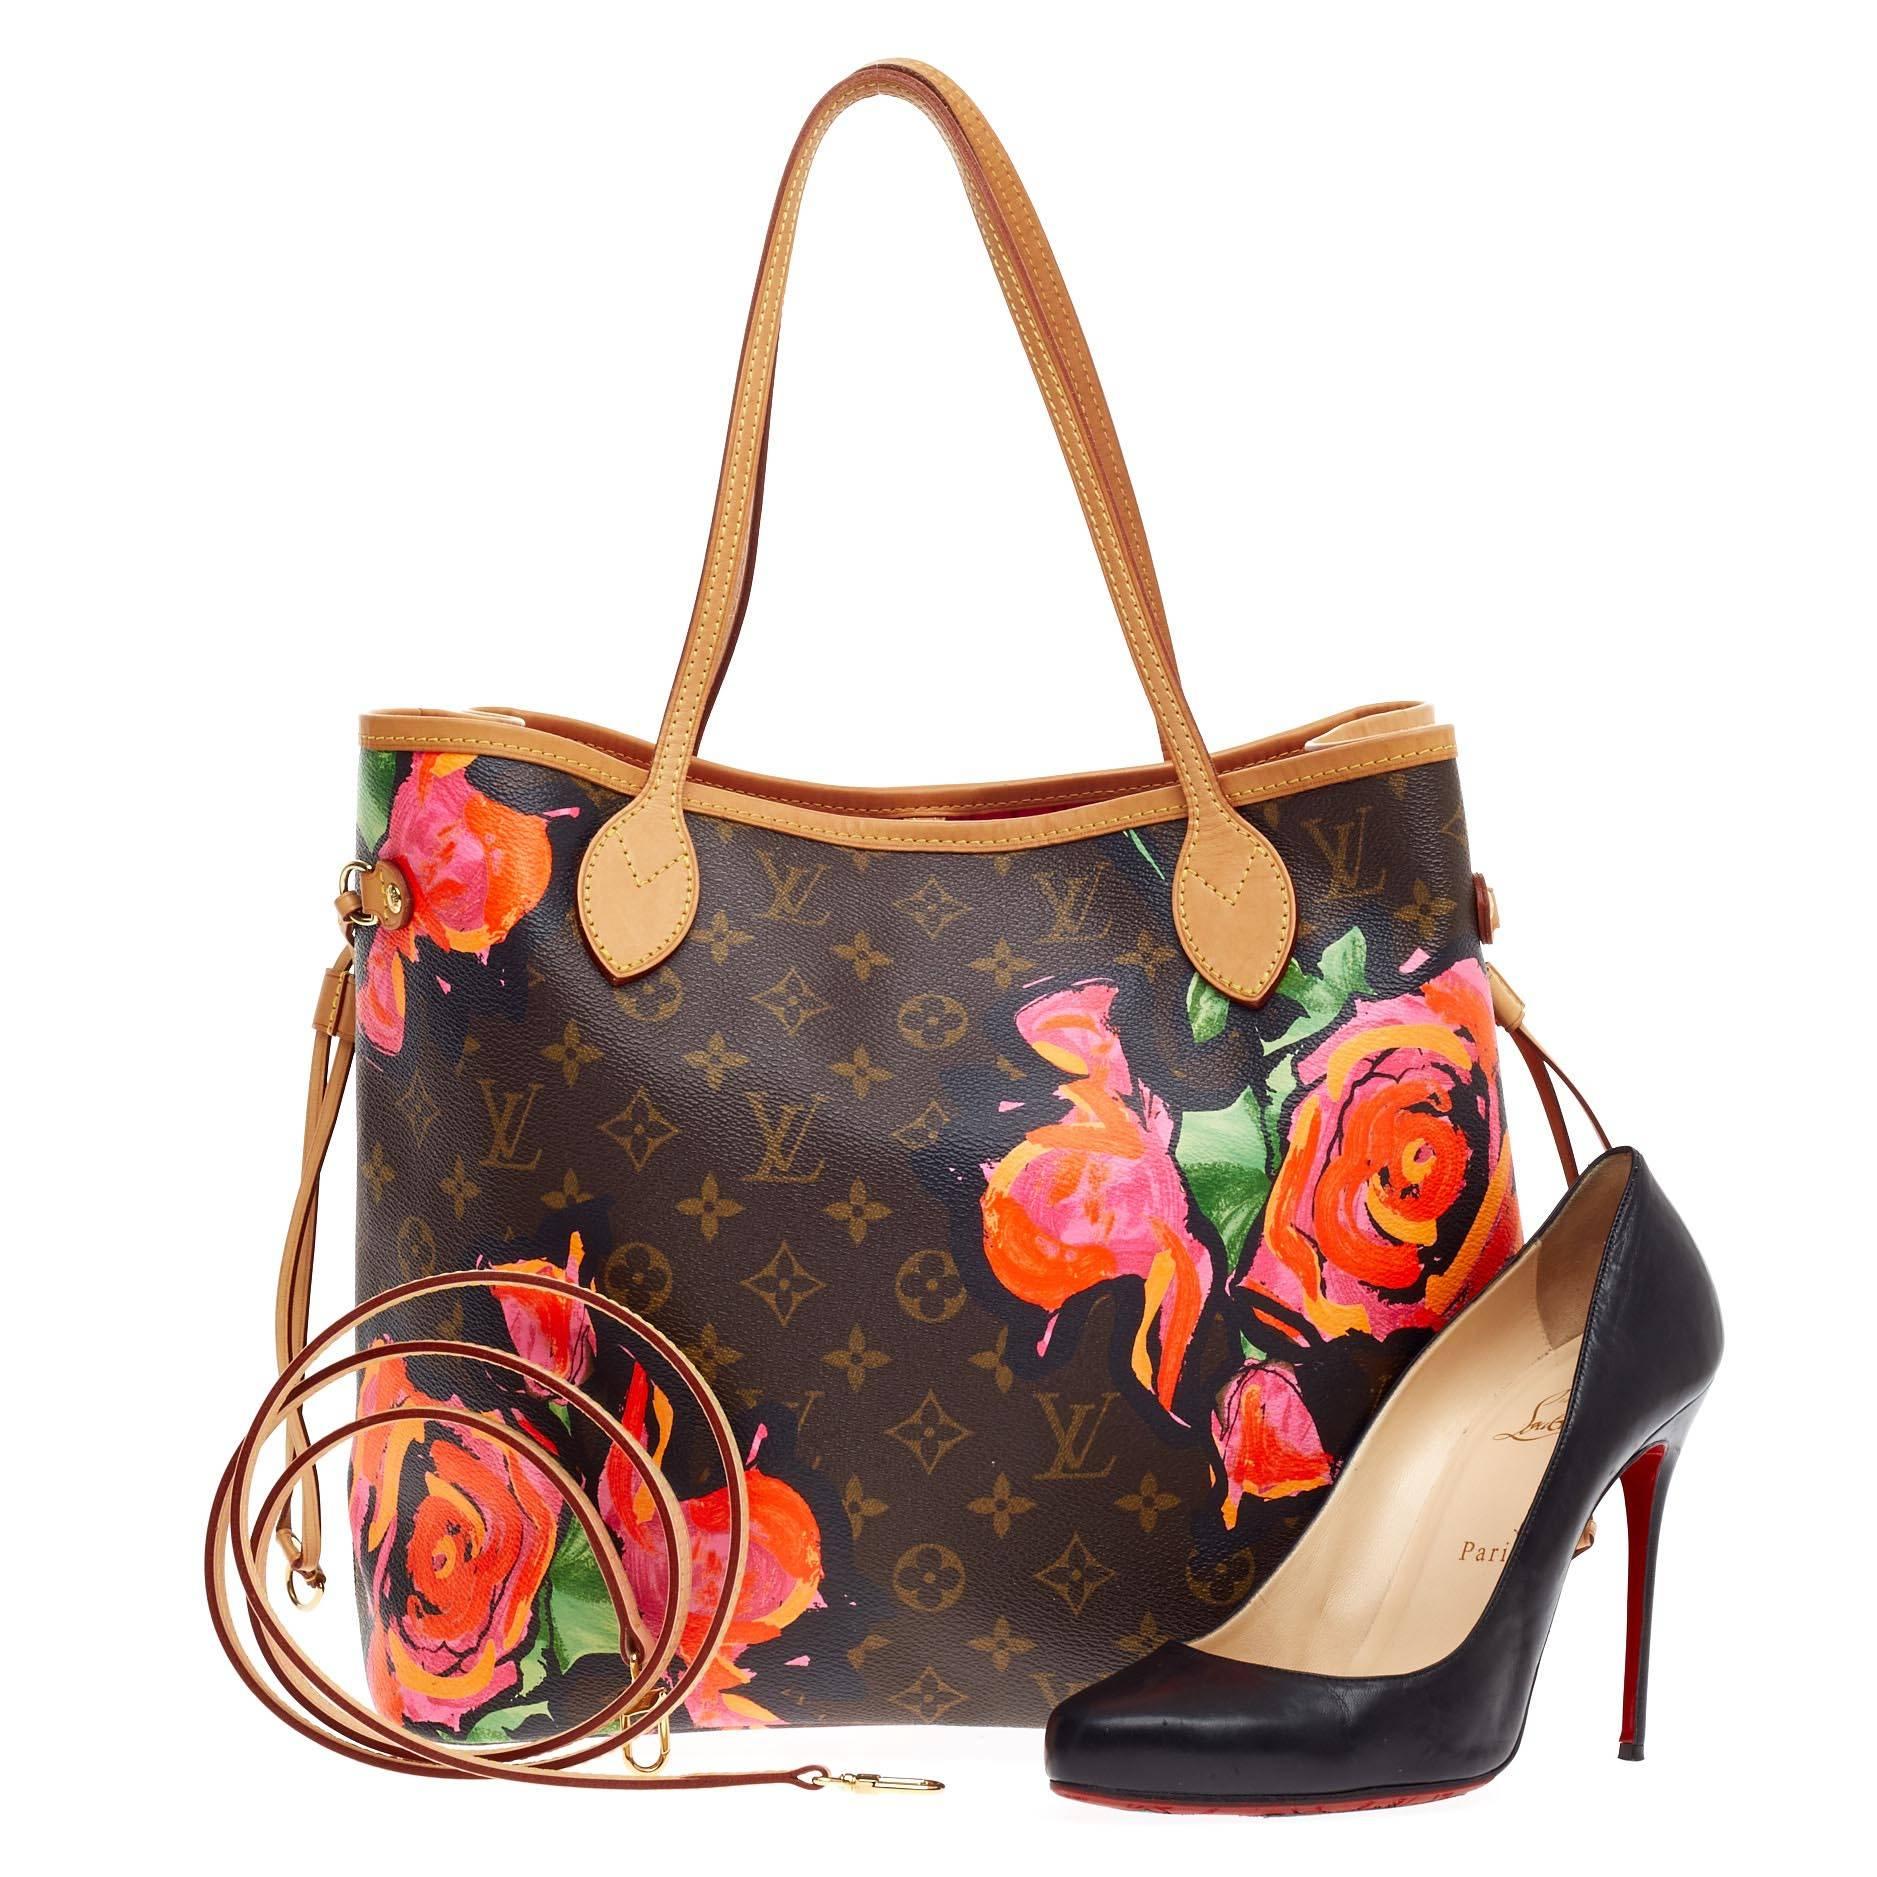 This authentic Louis Vuitton Neverfull Limited Edition Monogram Canvas Roses MM presented in the brand's Spring/Summer 2009 Collection created by Marc Jacobs to honor the American designer icon Stephen Sprouse updates its classic tote for a fresh,